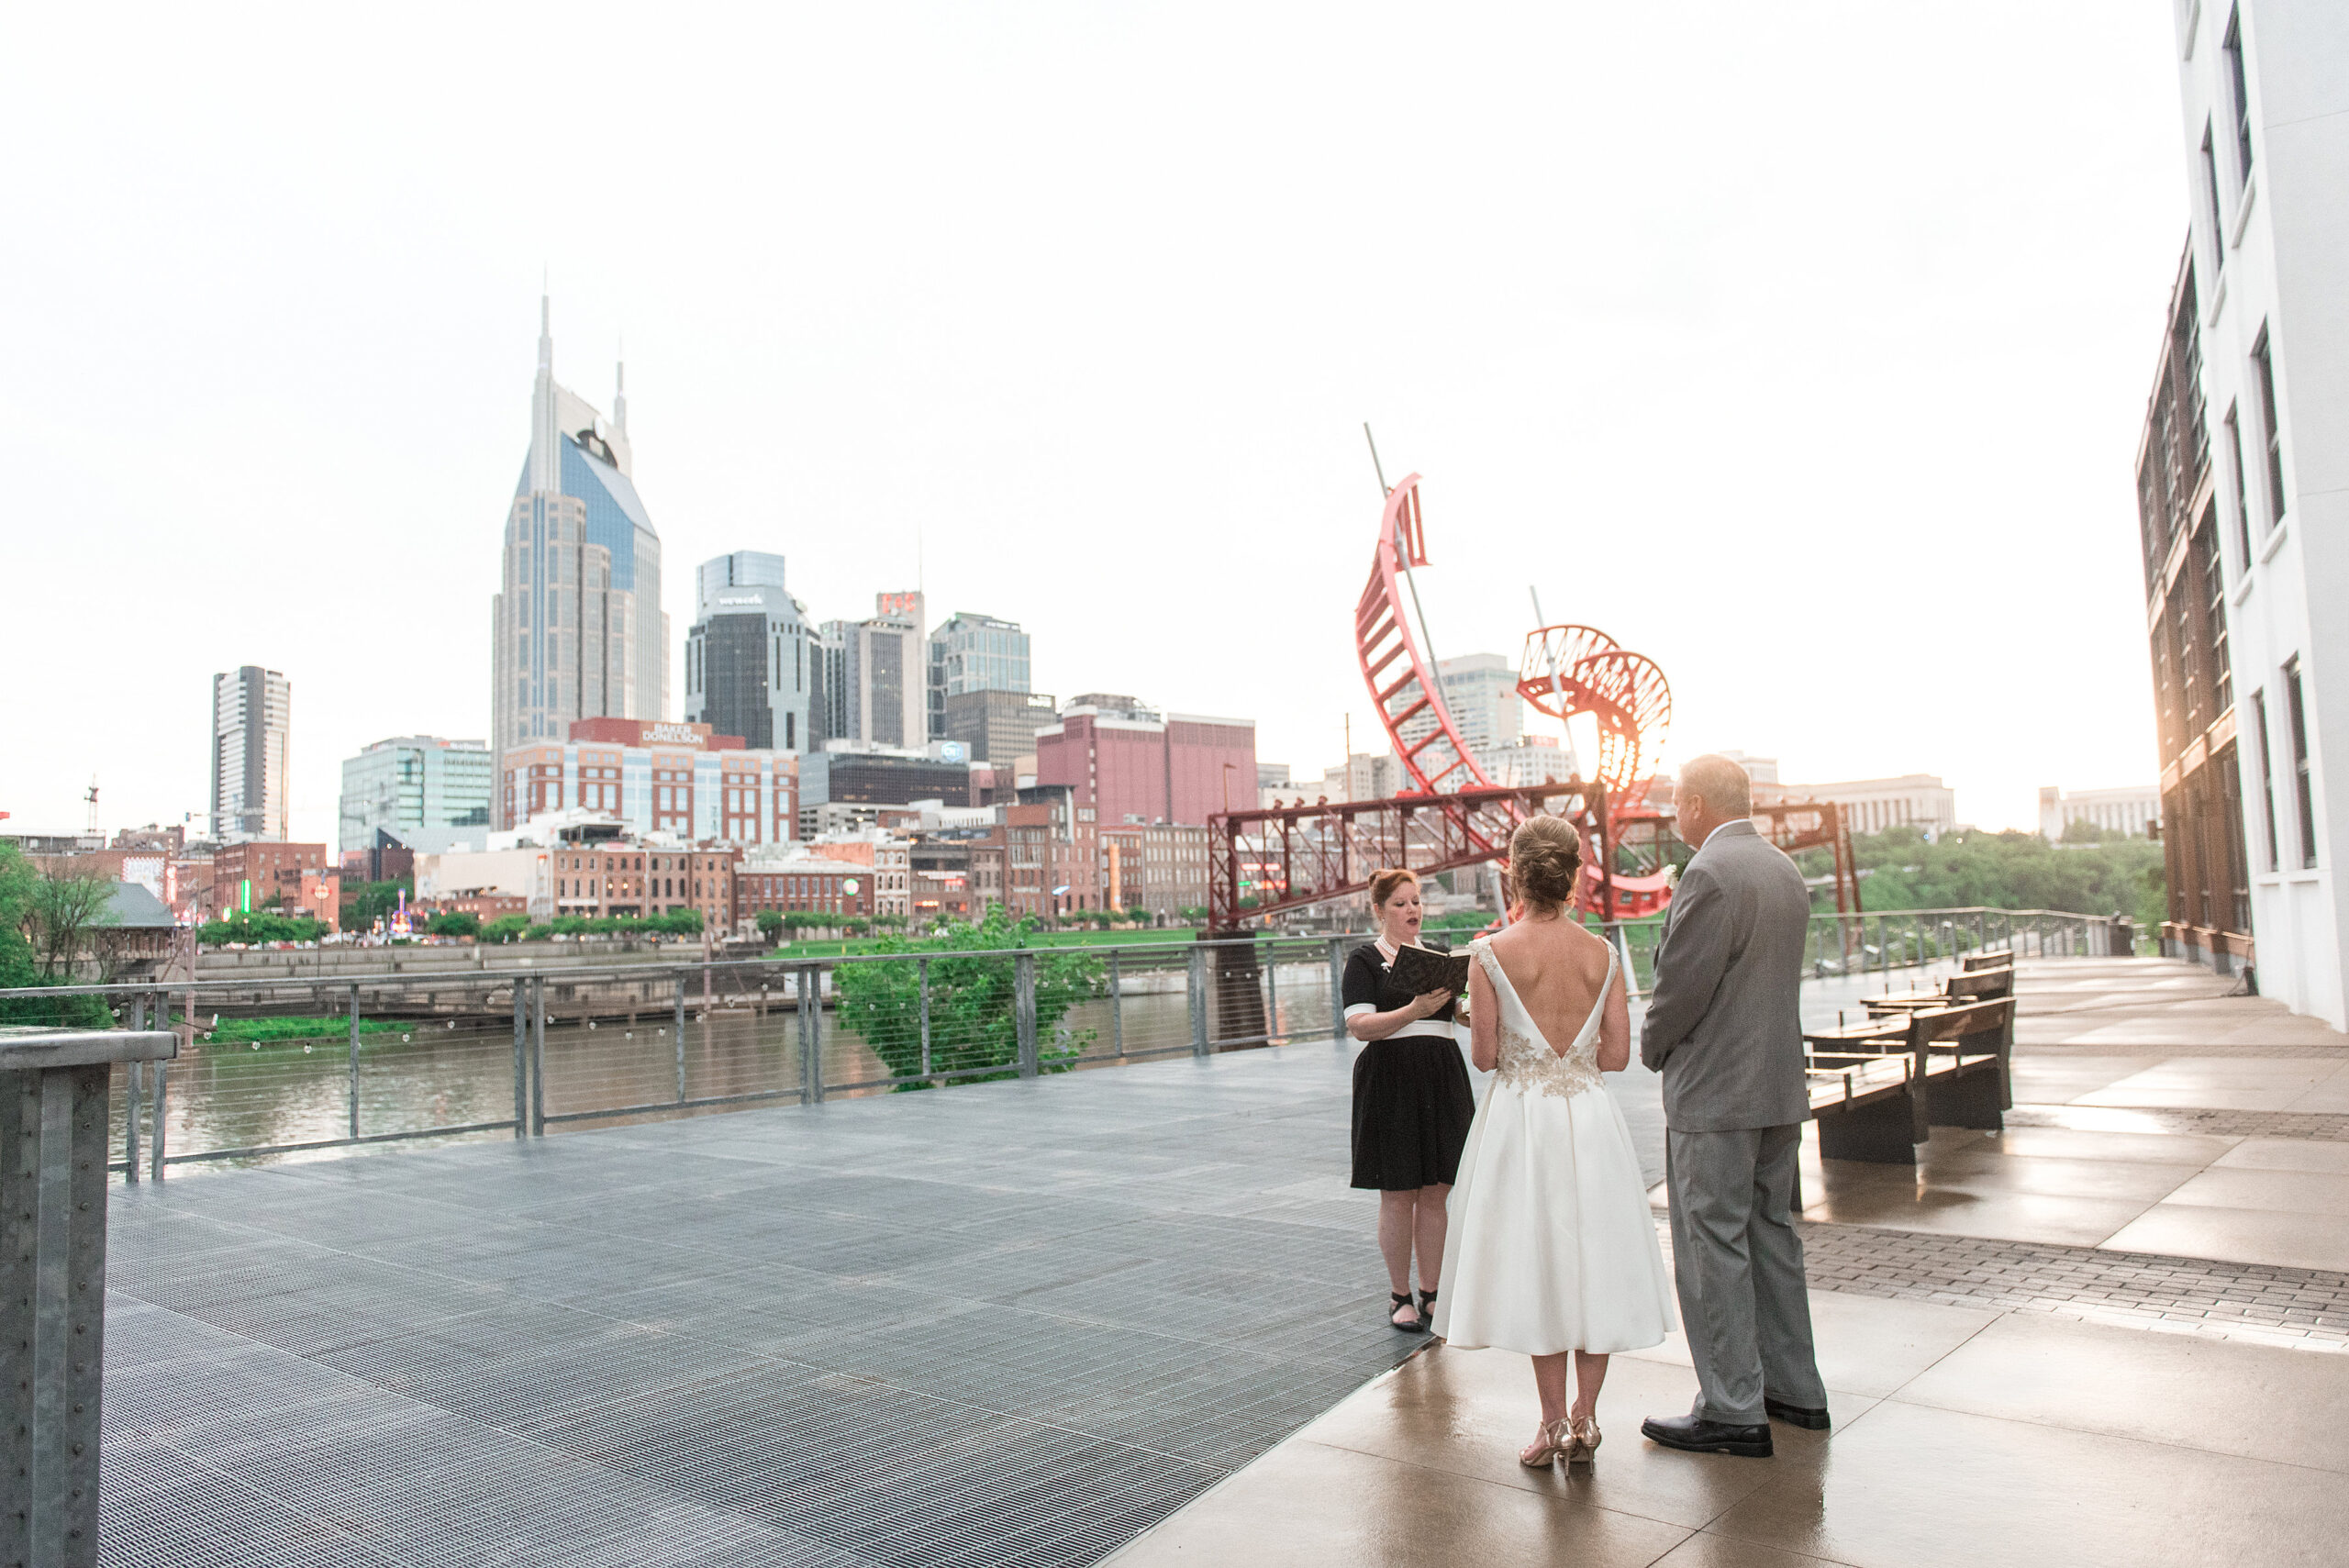 With the Nashville skyline behind them, the bride and groom listen to the officiant during their wedding ceremony. Standing on the banks of the Cumberland River the officiant is wearing a black dress with a white belt and black shoes. She is holding a leather bound book. The bride is wearing a tea length white sleeveless wedding dress with a plunging back and lace detailing around the waist and shoulders. The groom is wearing a gray suit with black shoes. 